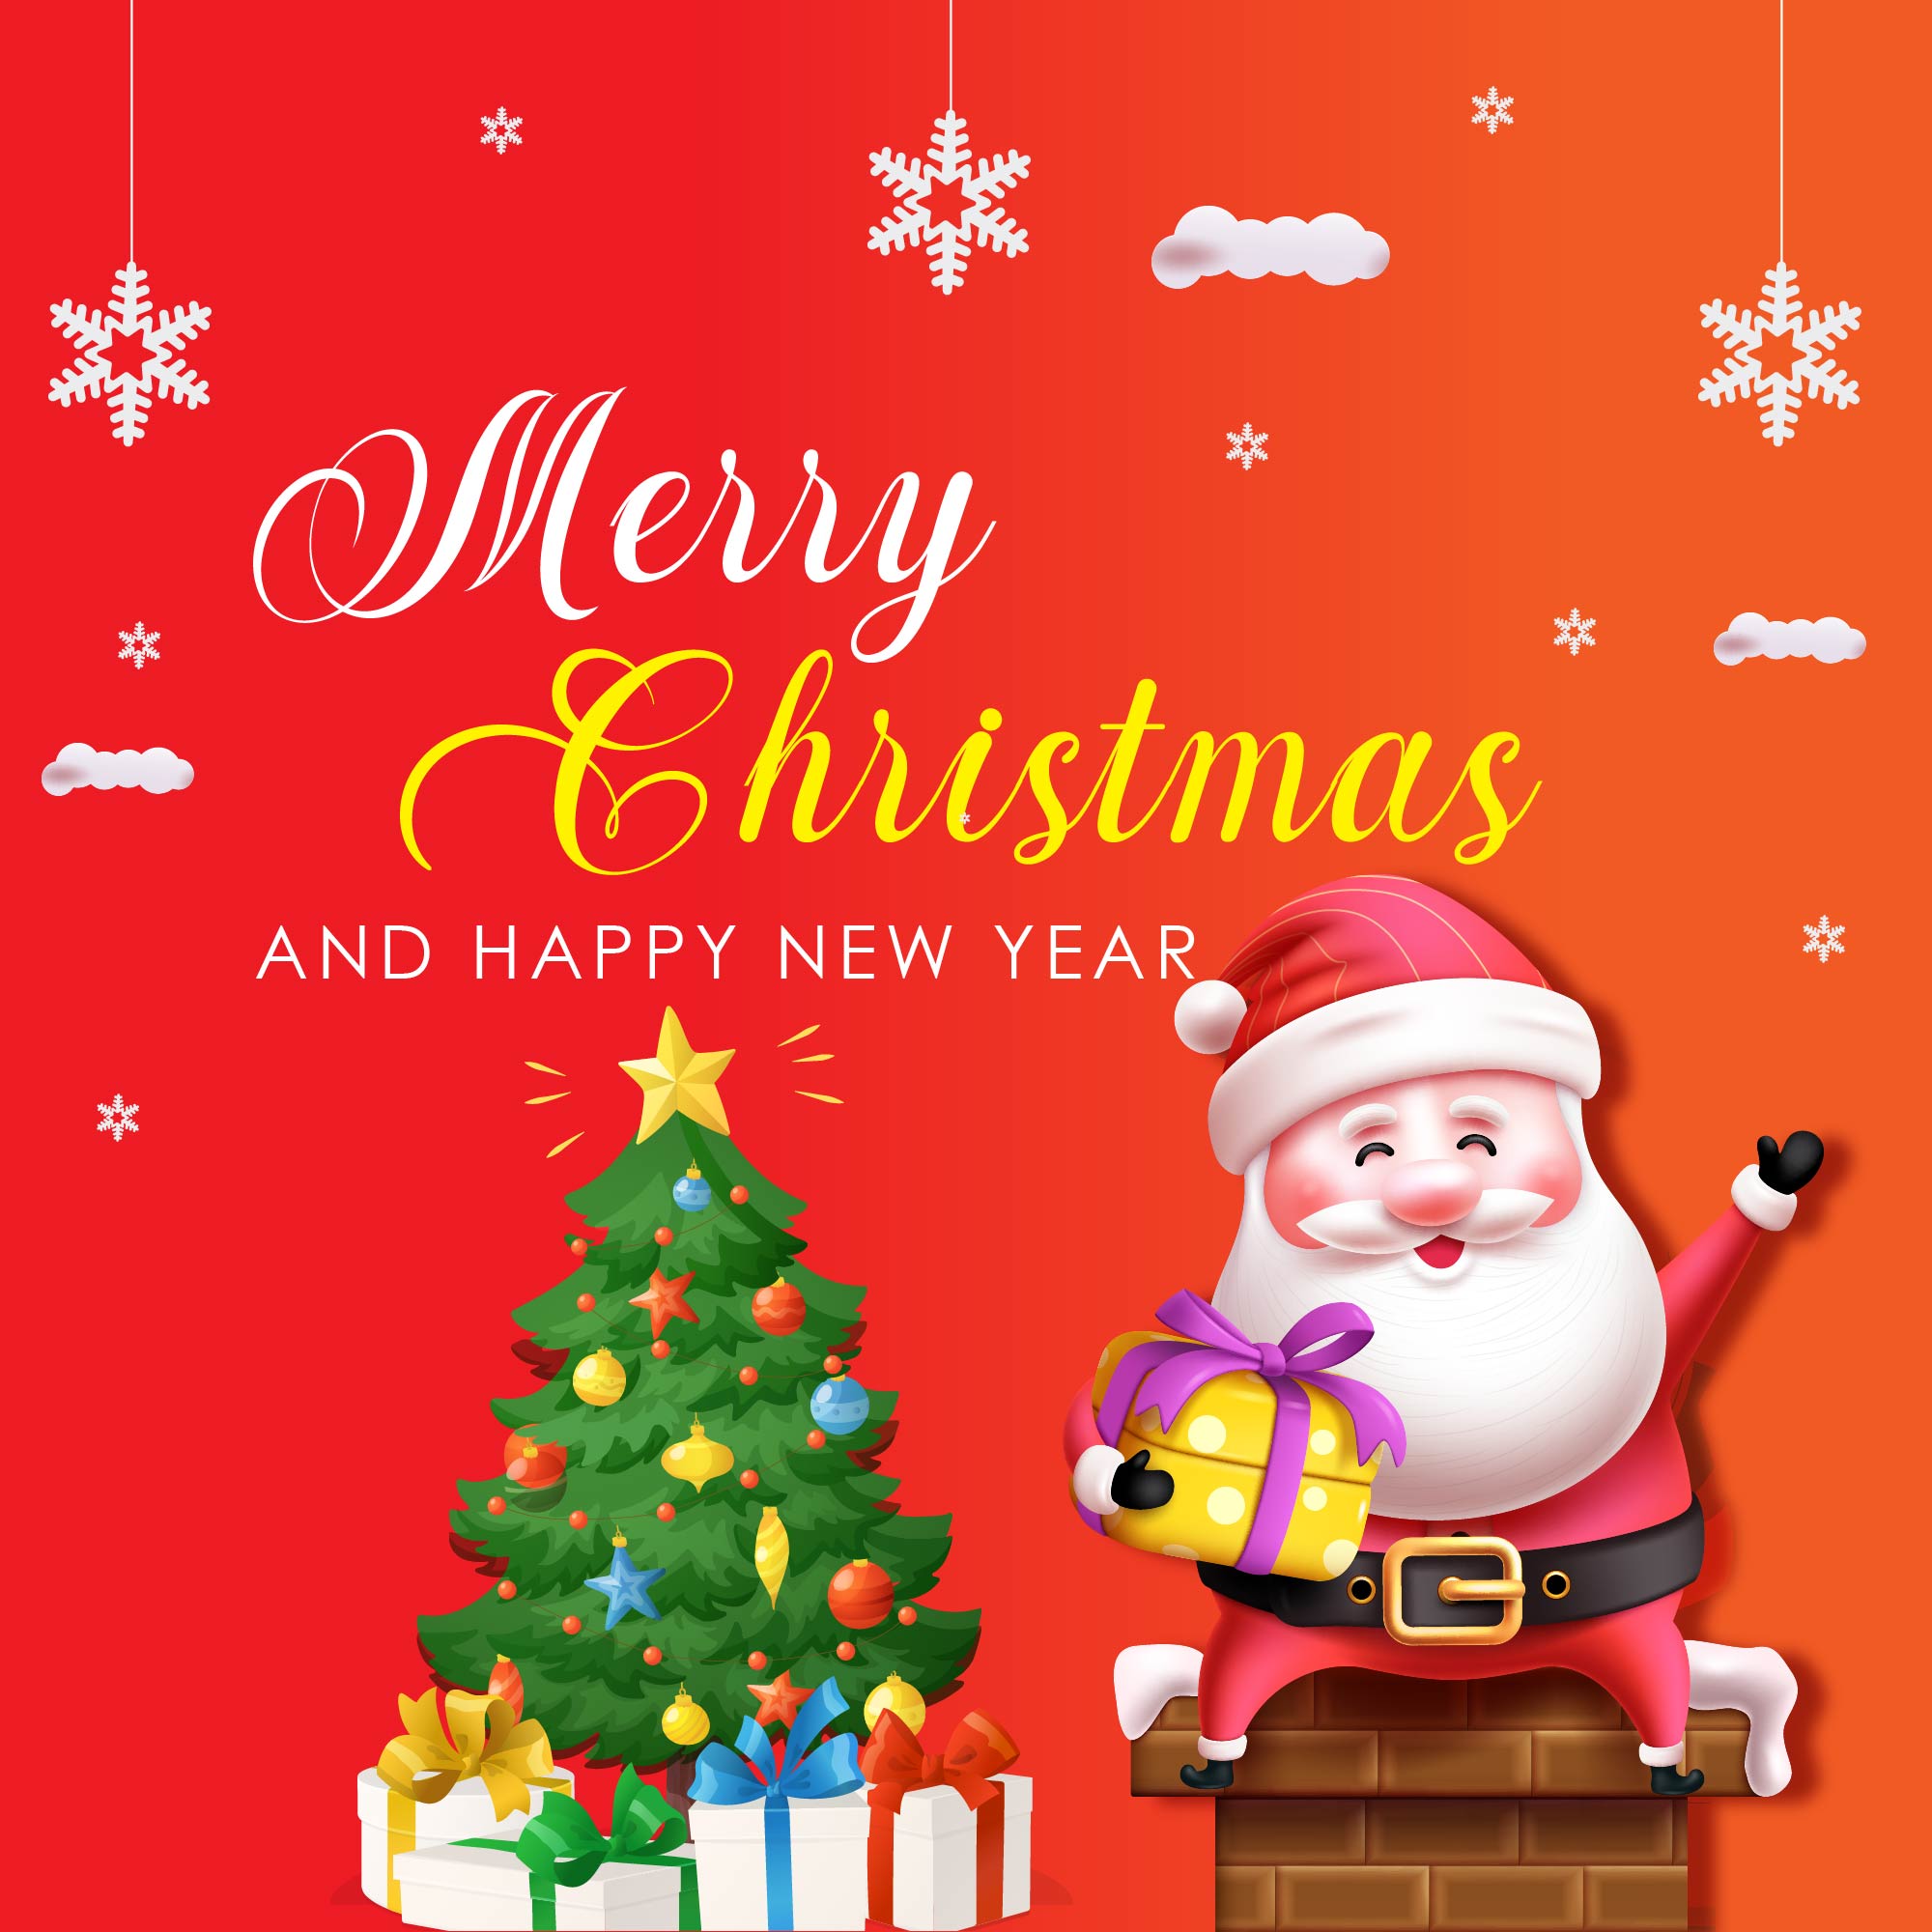 christmas vector characters like santa claus holding gift with merry christmas greeting and tree in a red and orange background. vector illustration 01 396